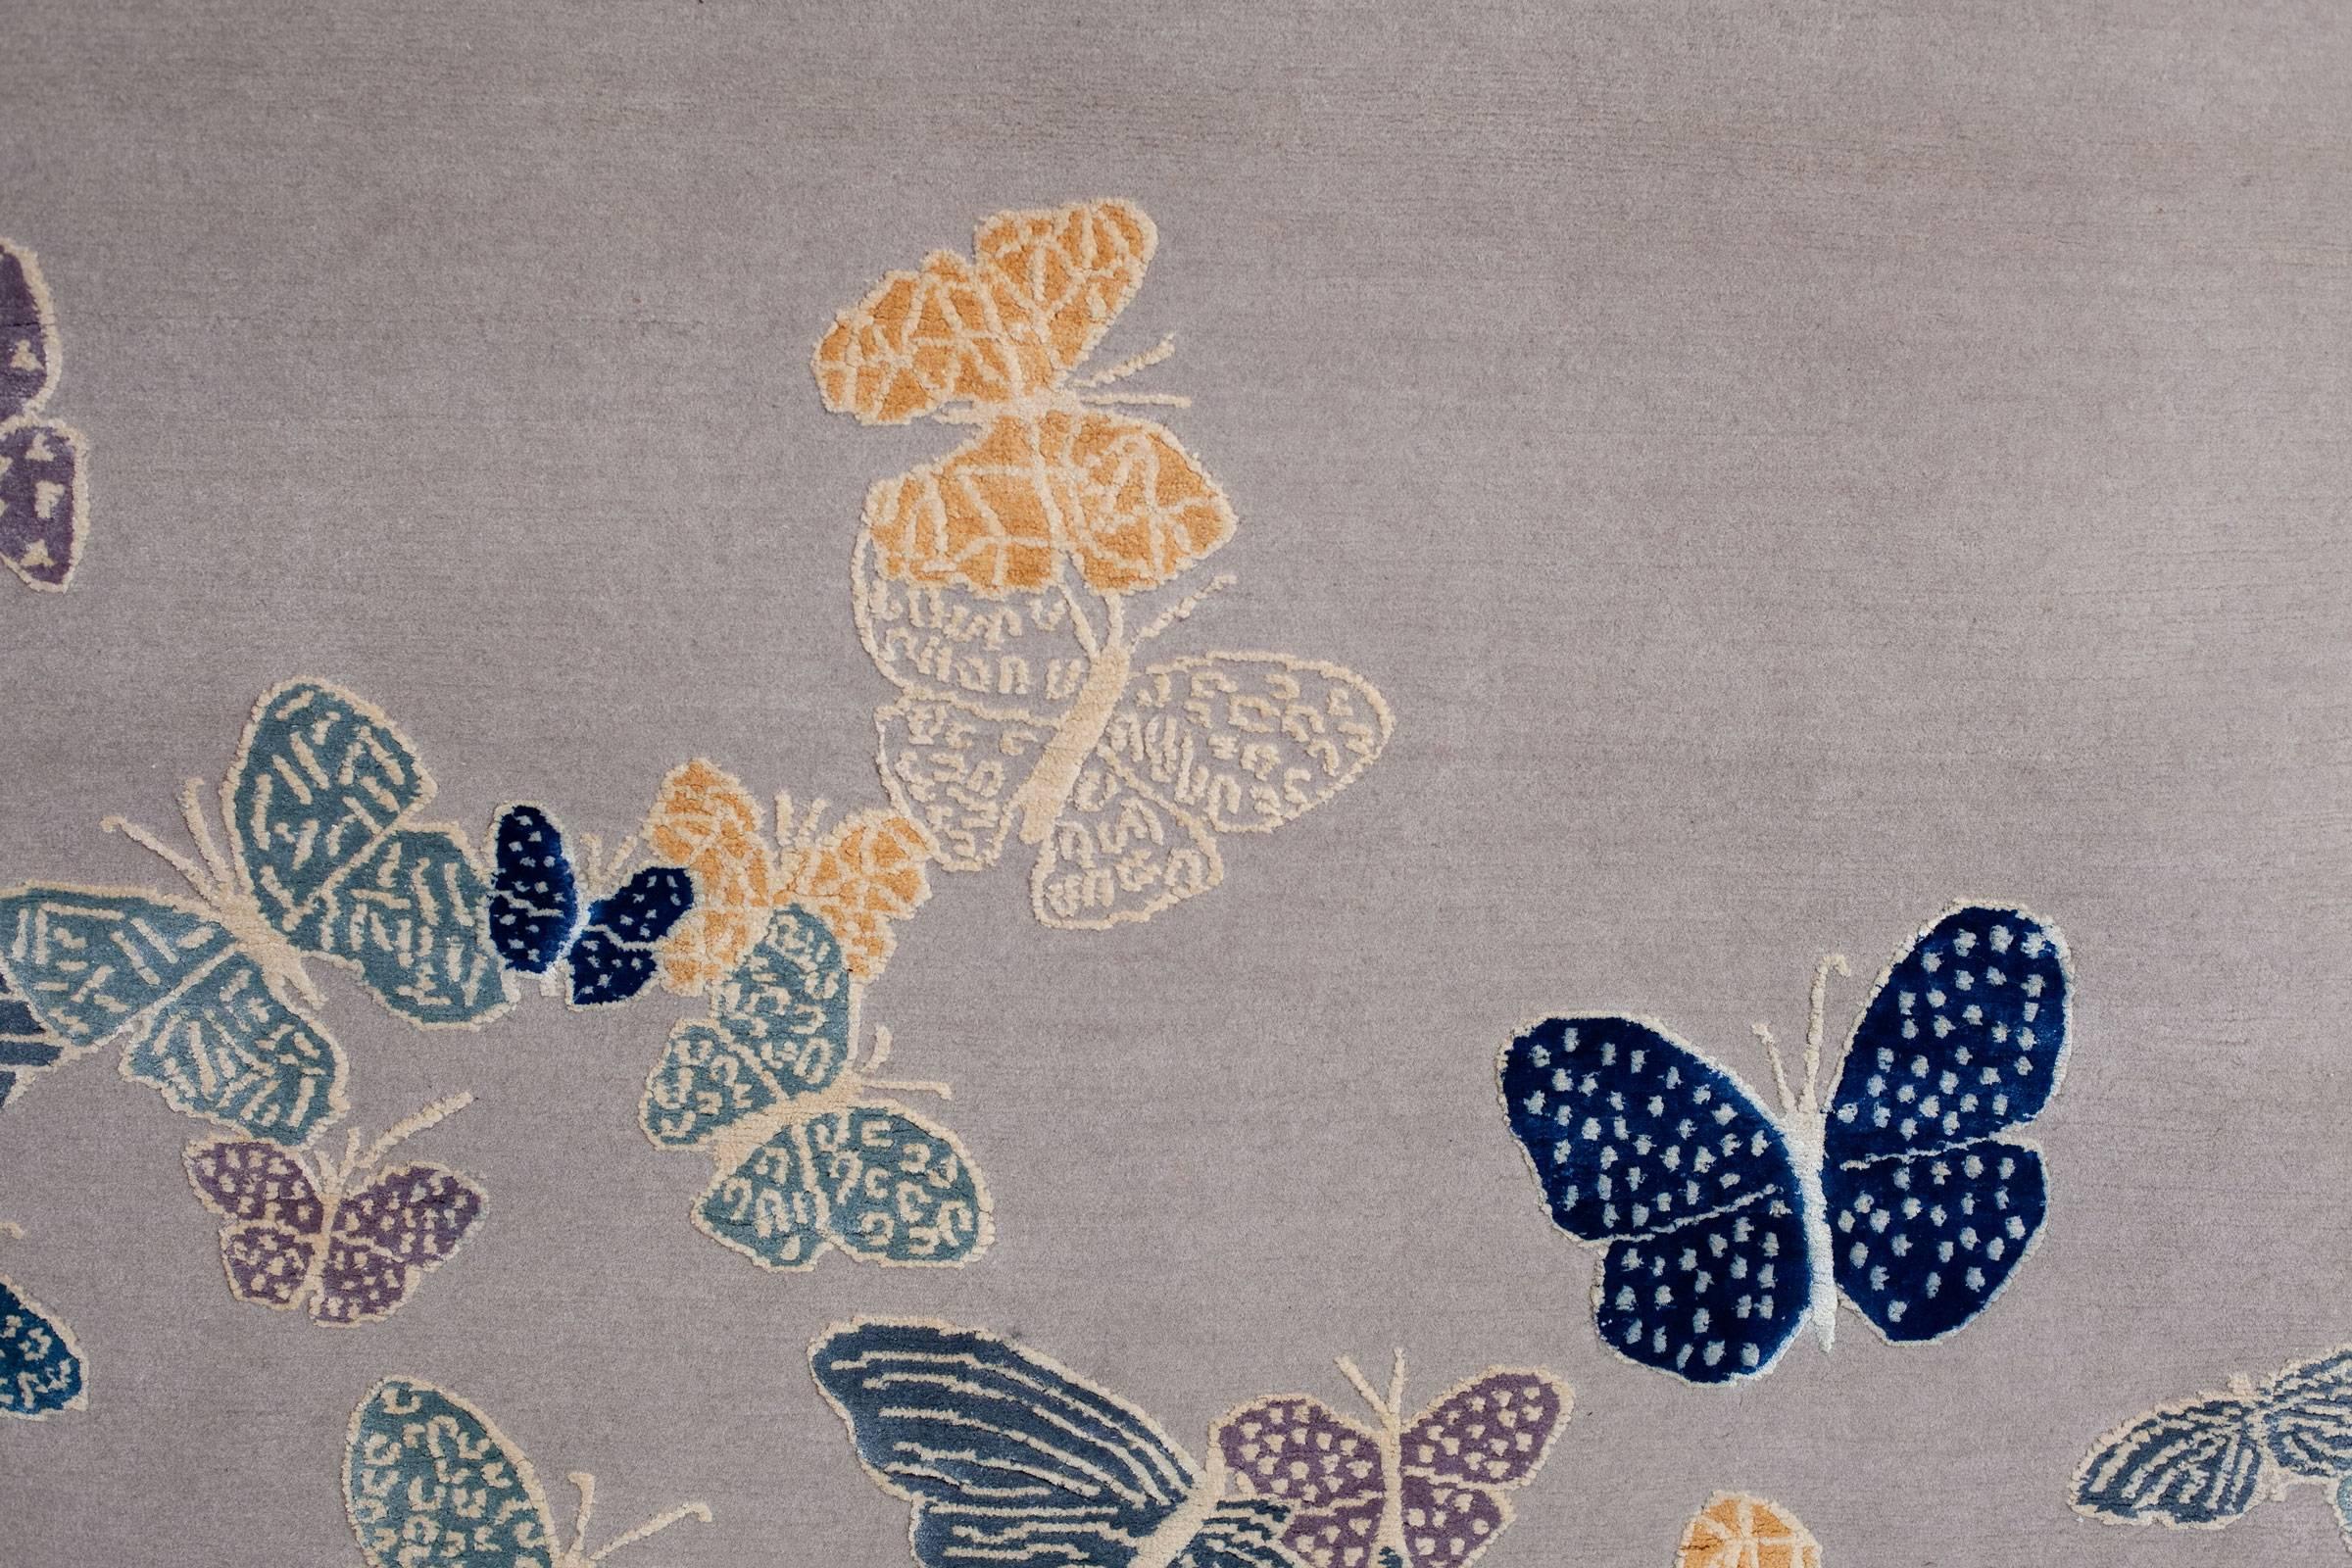 It's IN STOCK!
Sergio Mannino Studio's collection of rugs is expanded with new designs. This one measures 6' x 8' (180x240cm).
Hand-drawn butterflies seem to come out of the floor. The background is wool, while the butterflies are made with silk.